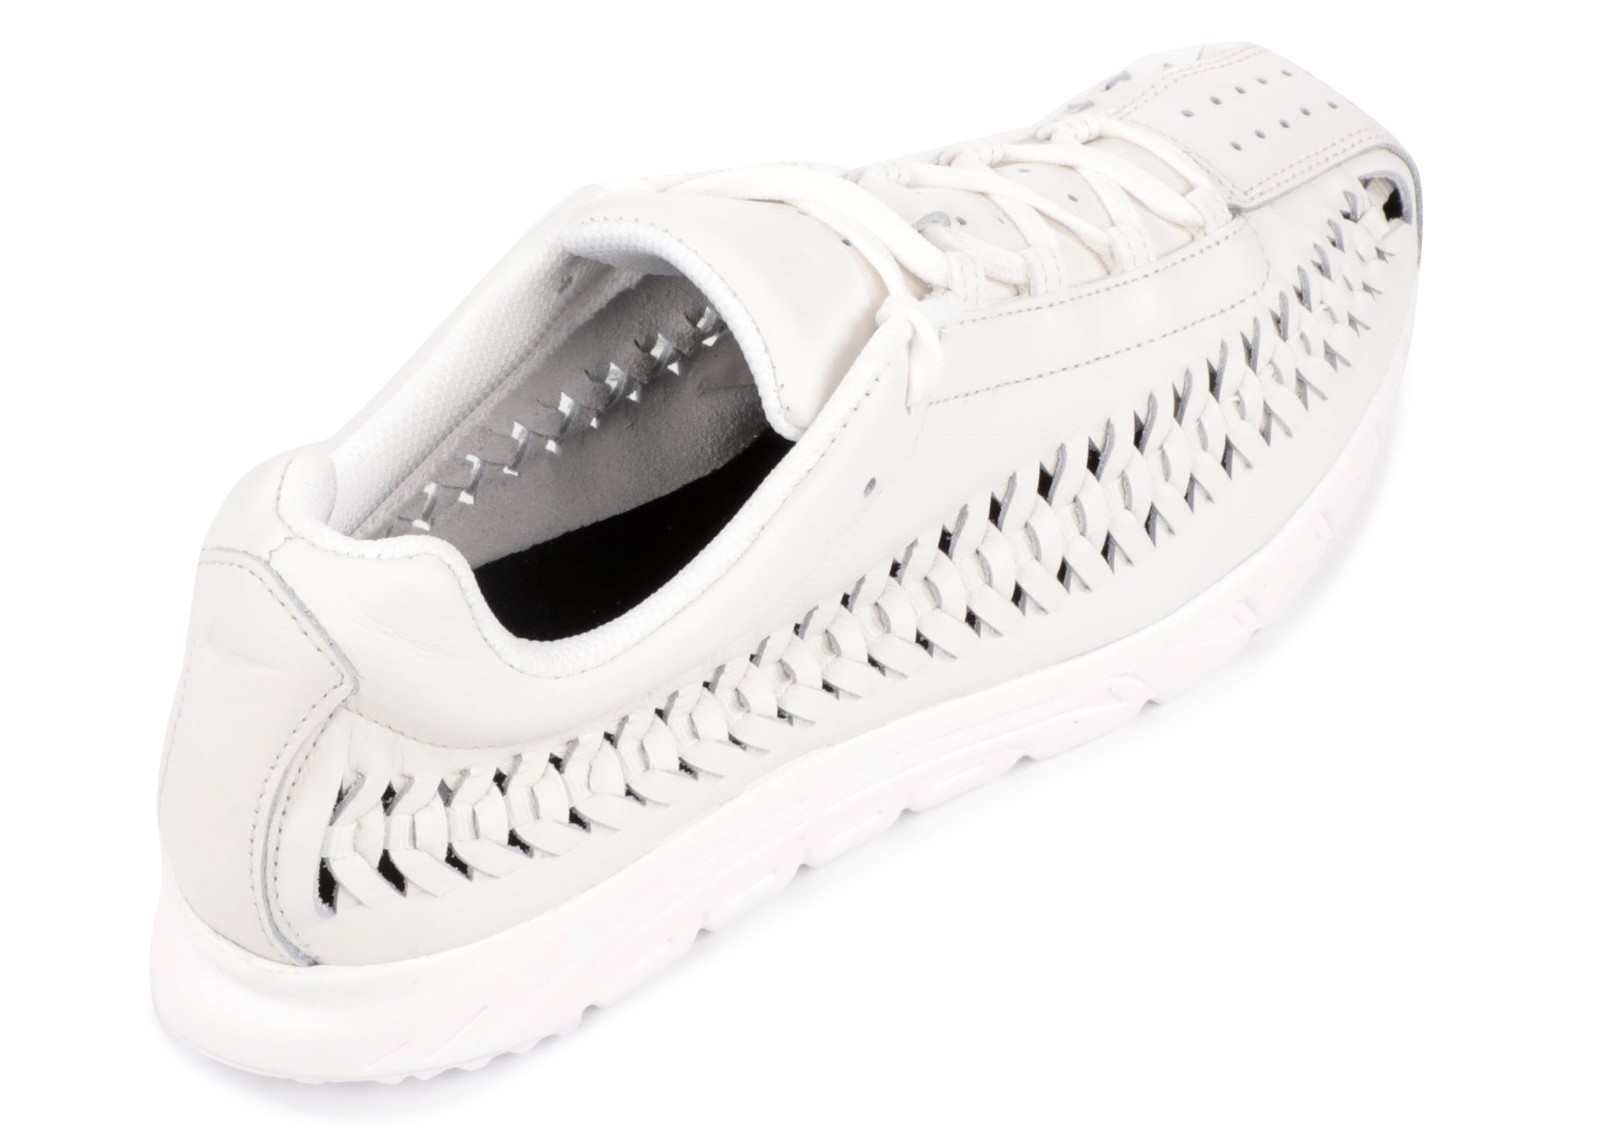 100 nike rose pink and yellow running shoes olympics women - Nike rose Mayfly Woven White Summit 833132 - StclaircomoShops